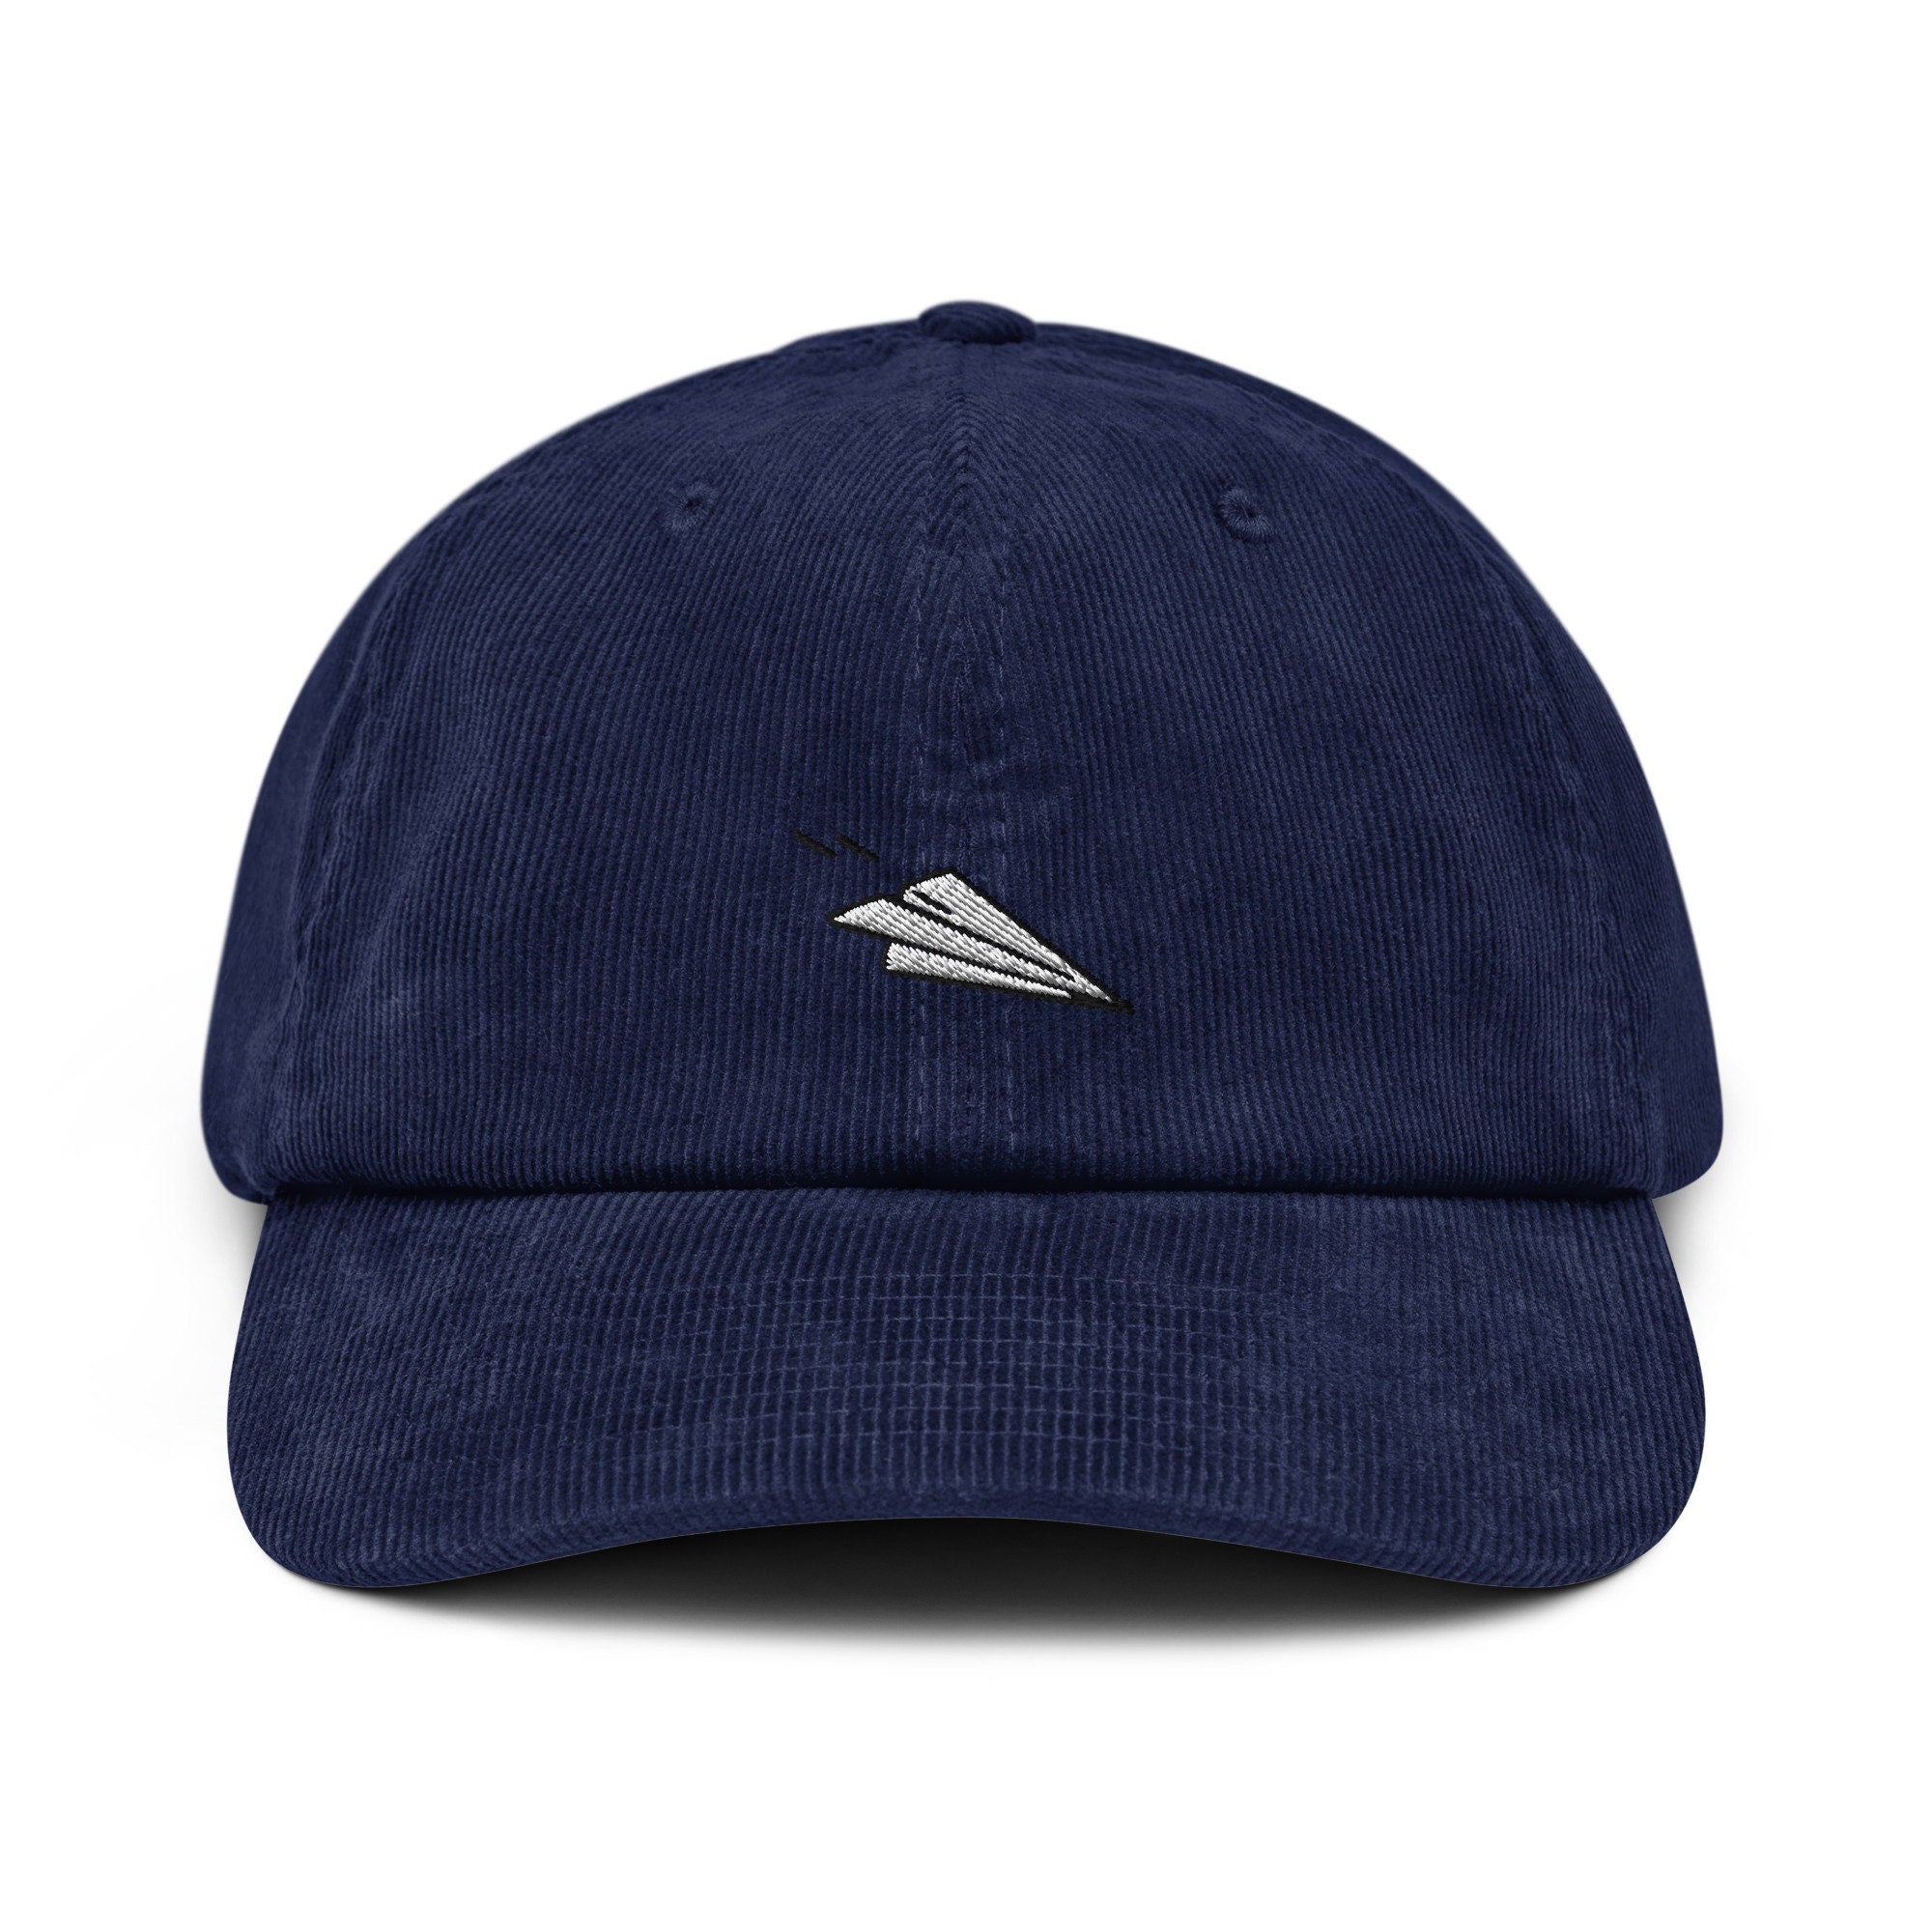 Paper Airplane Corduroy Hat, Handmade Embroidered Corduroy Dad Cap - Multiple Colors